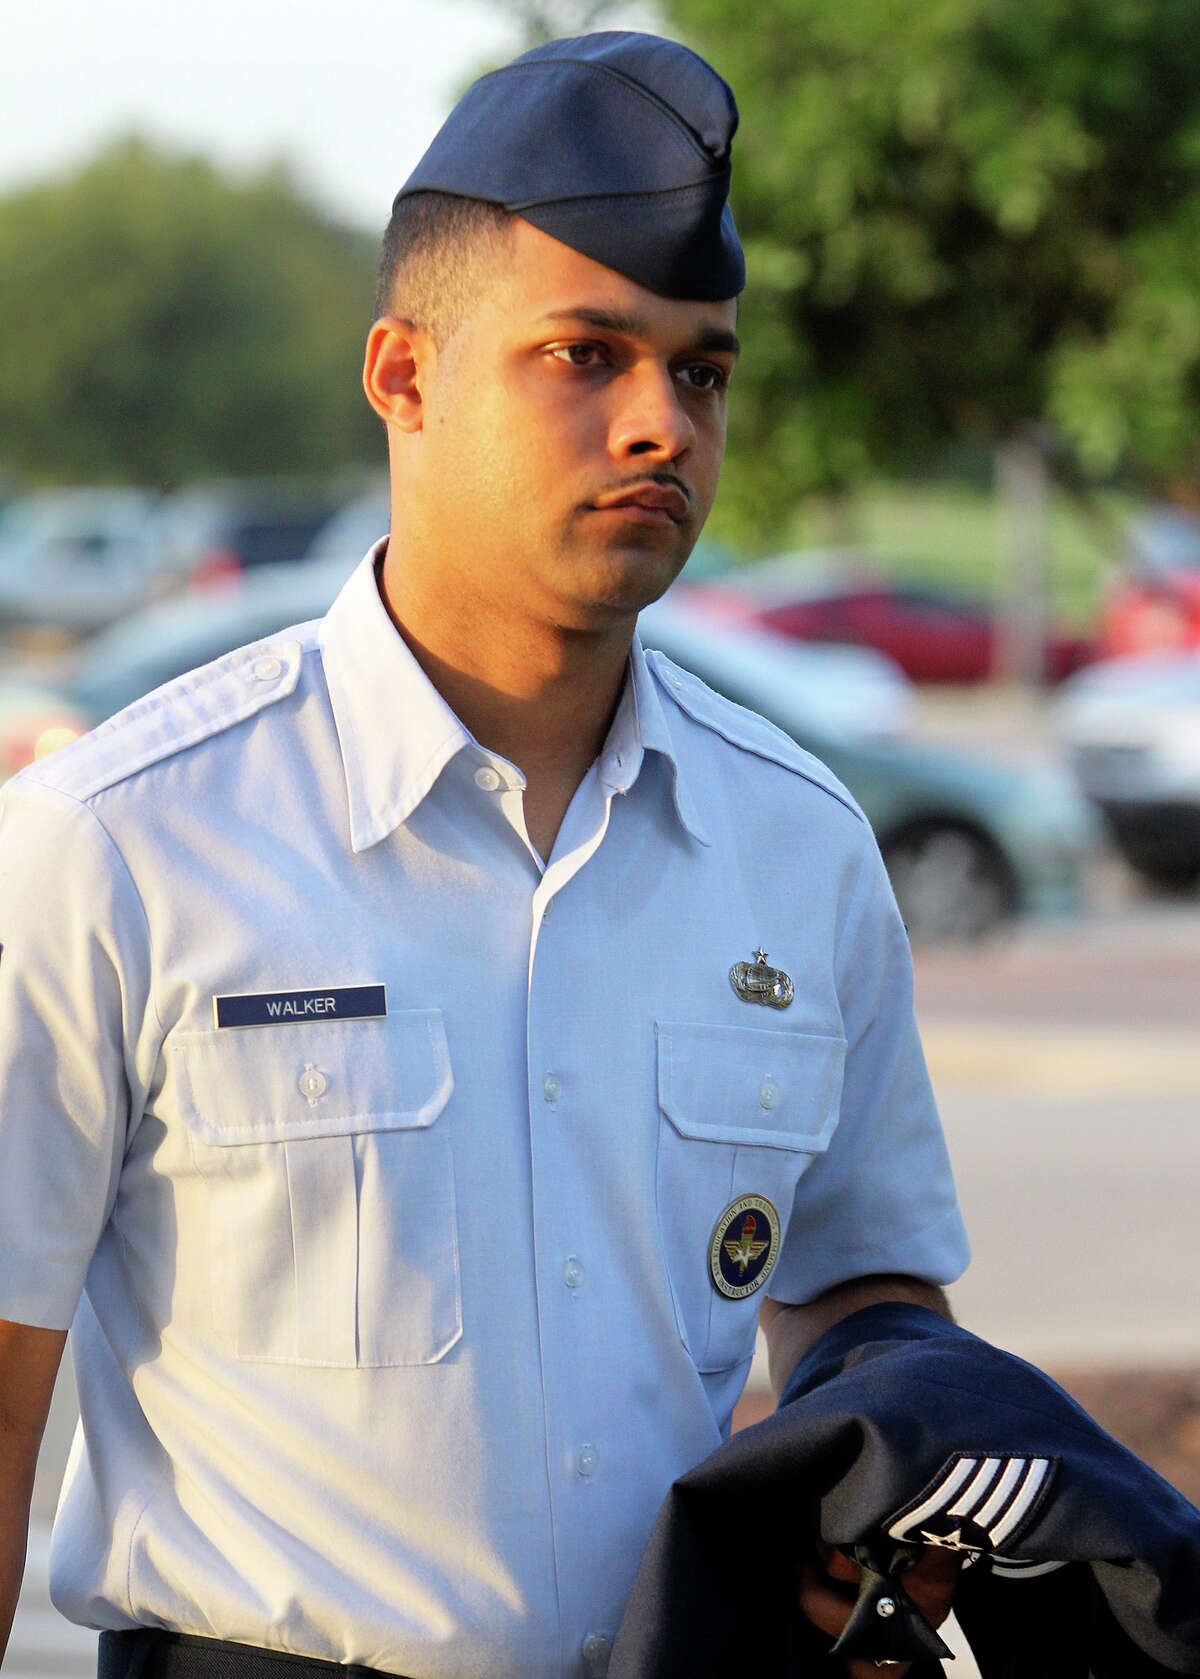 Air Force Sgt. Luis Walker enters the 37th Training Wing Headquarters for sentencing on July 21, 2012.